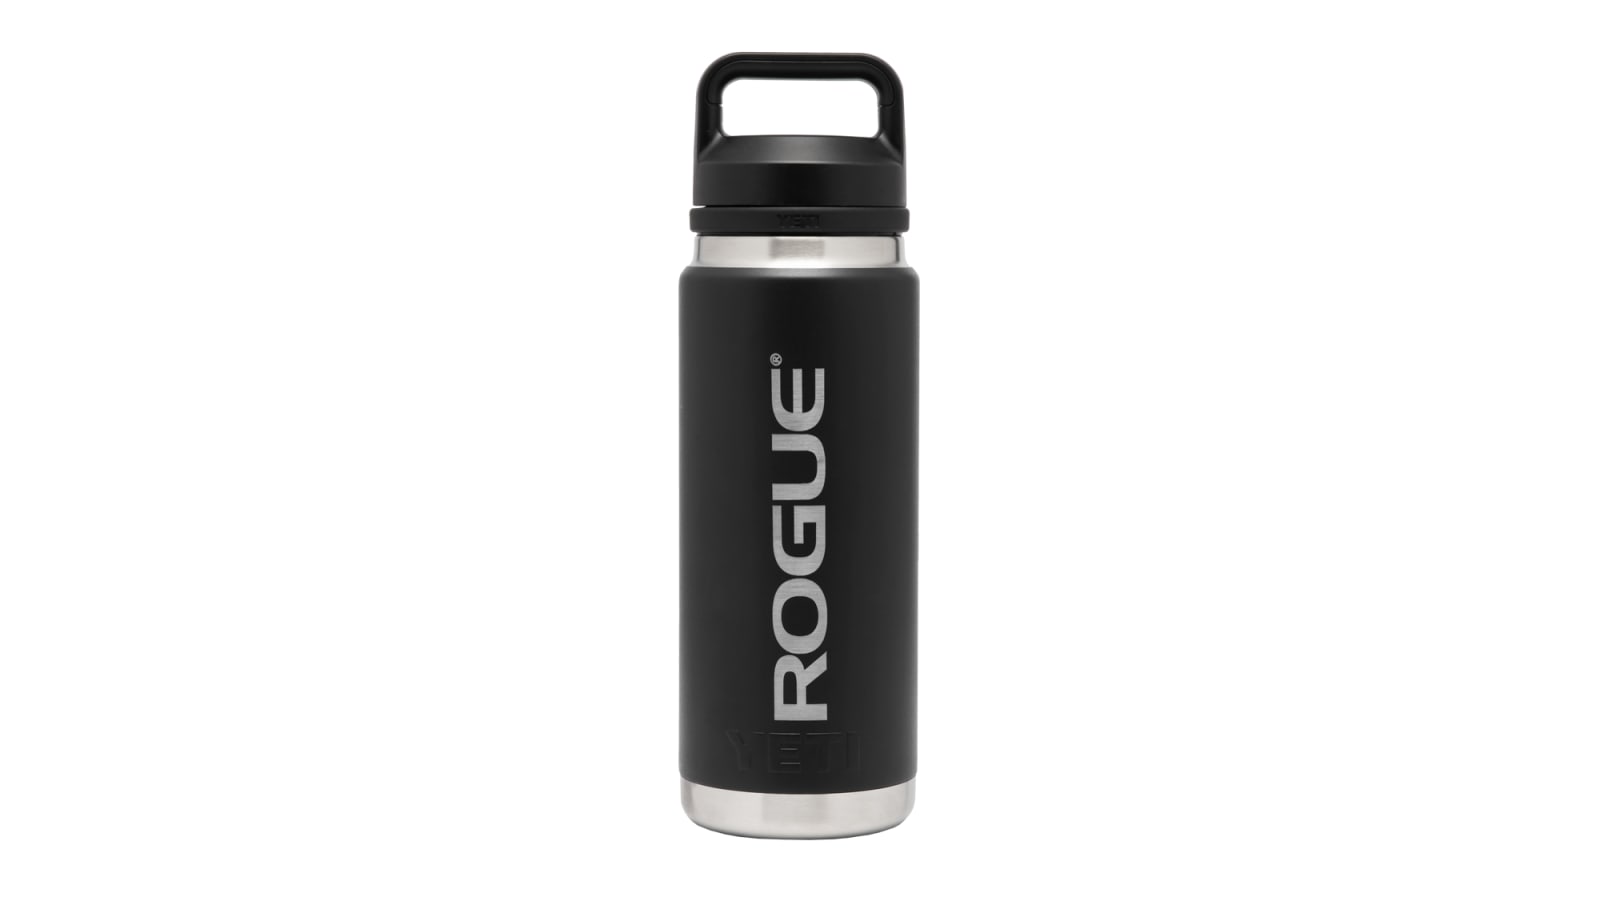 https://assets.roguefitness.com/f_auto,q_auto,c_limit,w_1600,b_rgb:ffffff/catalog/Gear%20and%20Accessories/Accessories/Shakers%20and%20Bottles/YT0058/YT0058-H_blgfwk.png